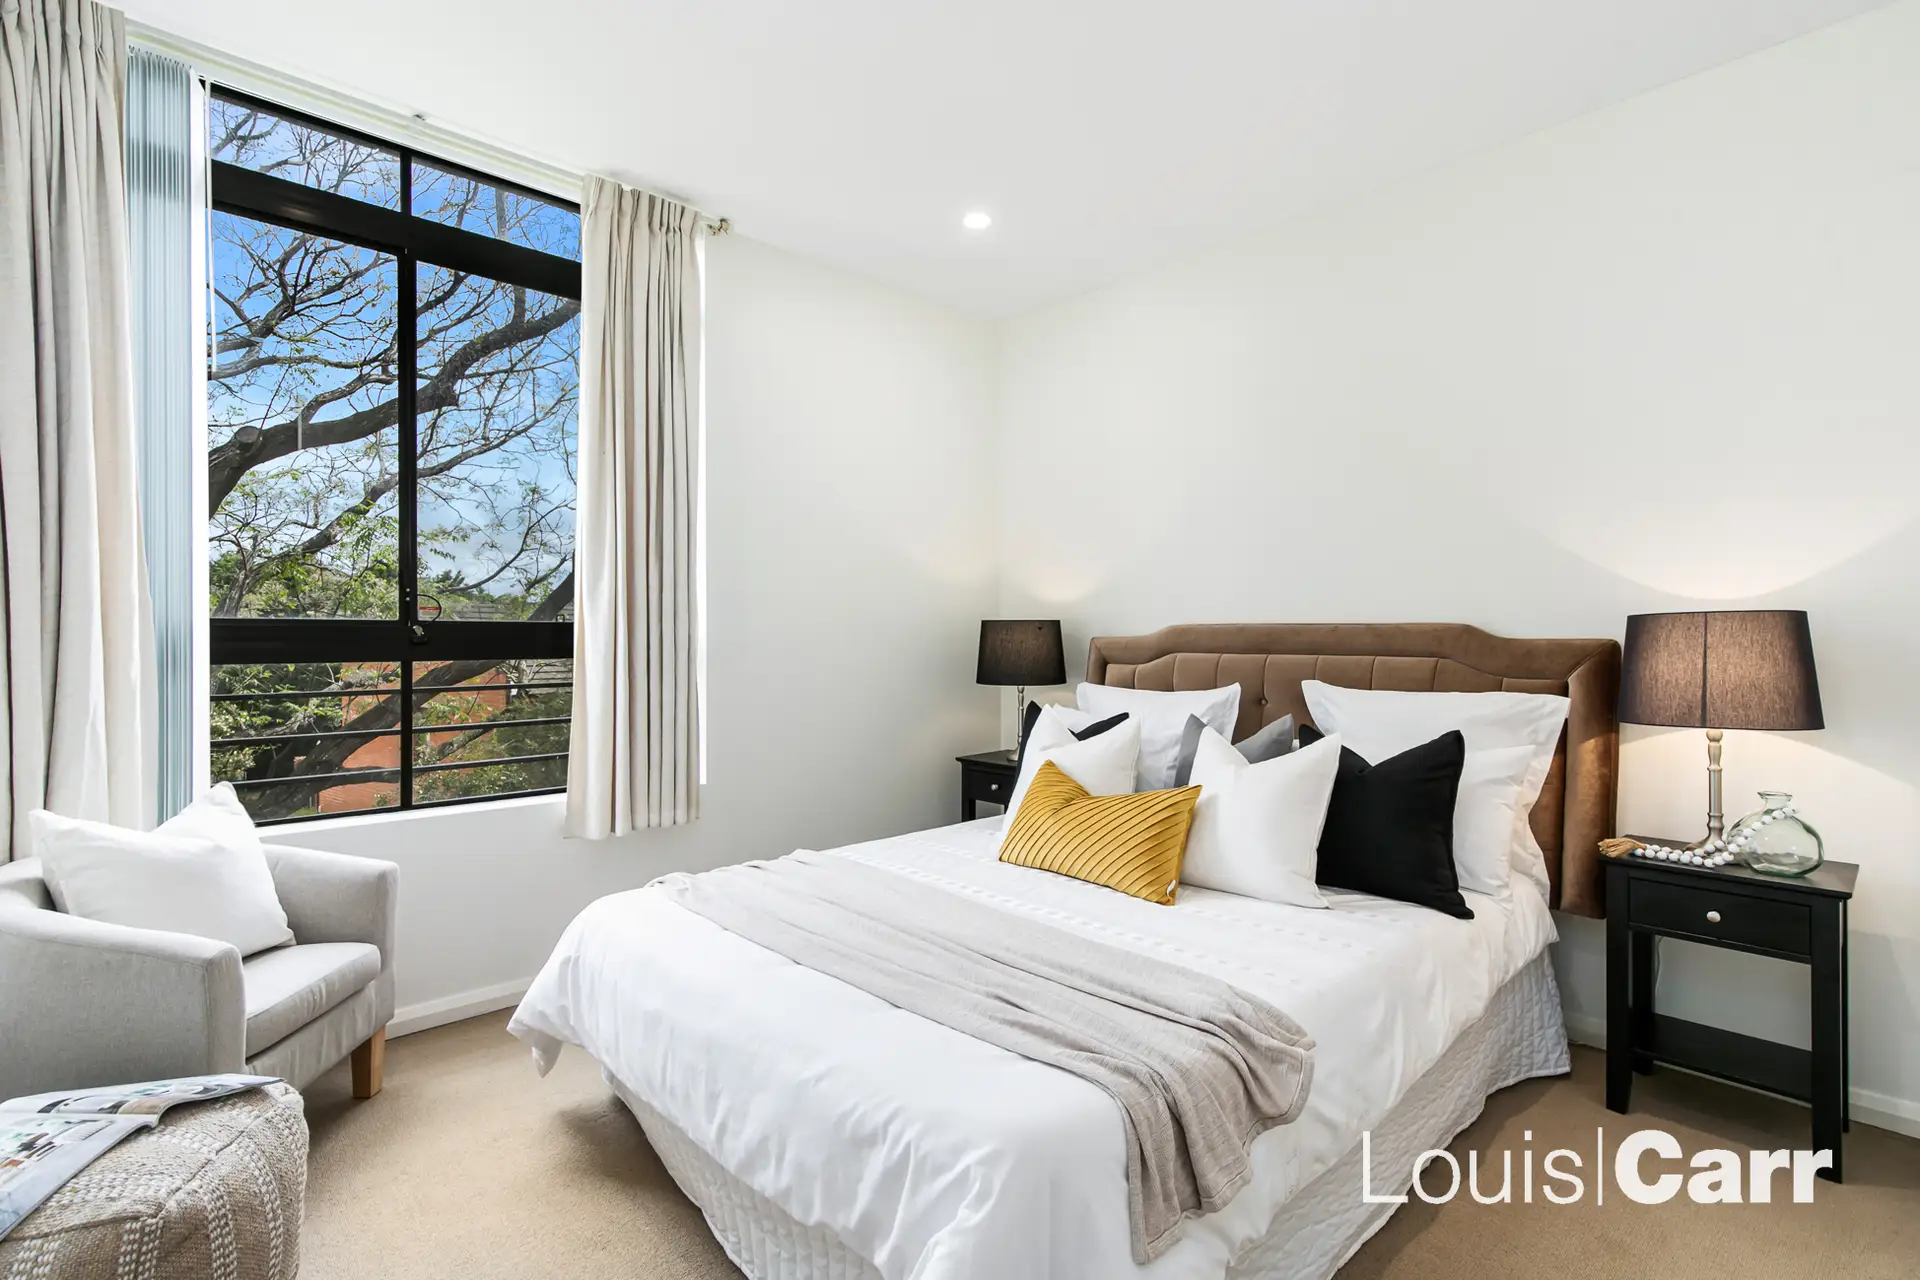 Photo #6: 101/2-4 Purser Avenue, Castle Hill - Sold by Louis Carr Real Estate